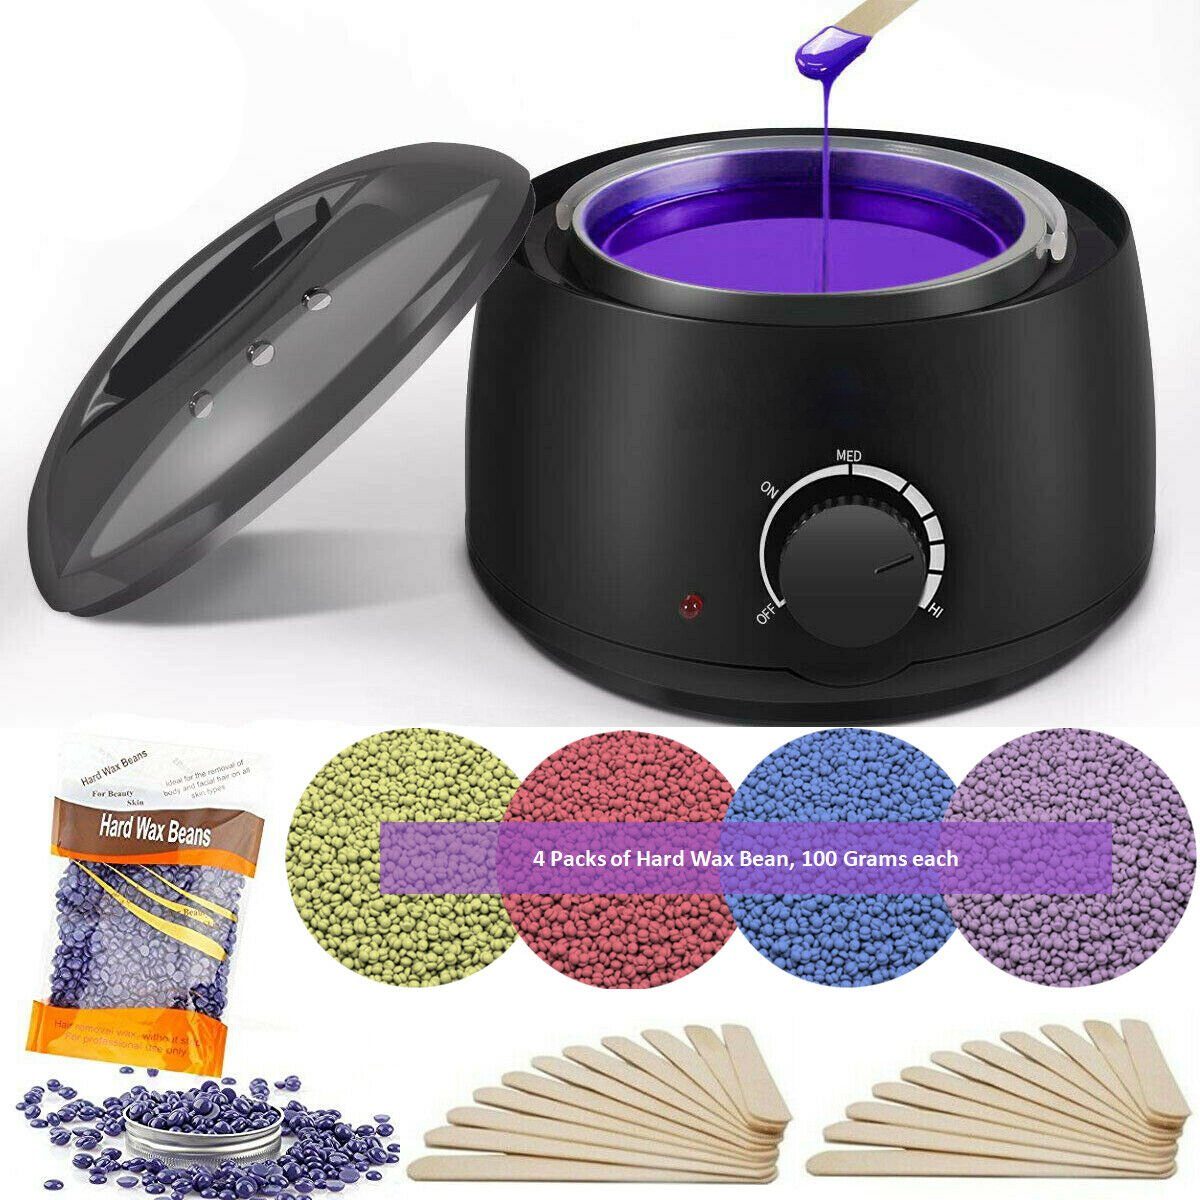 Waxing Kit for Women Men, Wax Warmer Hair Removal Kit with 4 Packs Hard Wax  Beans, Painless Wax Melt Warmer with 10 Wax Applicator Sticks, At Home  Waxing Kit for Sensitive Skin